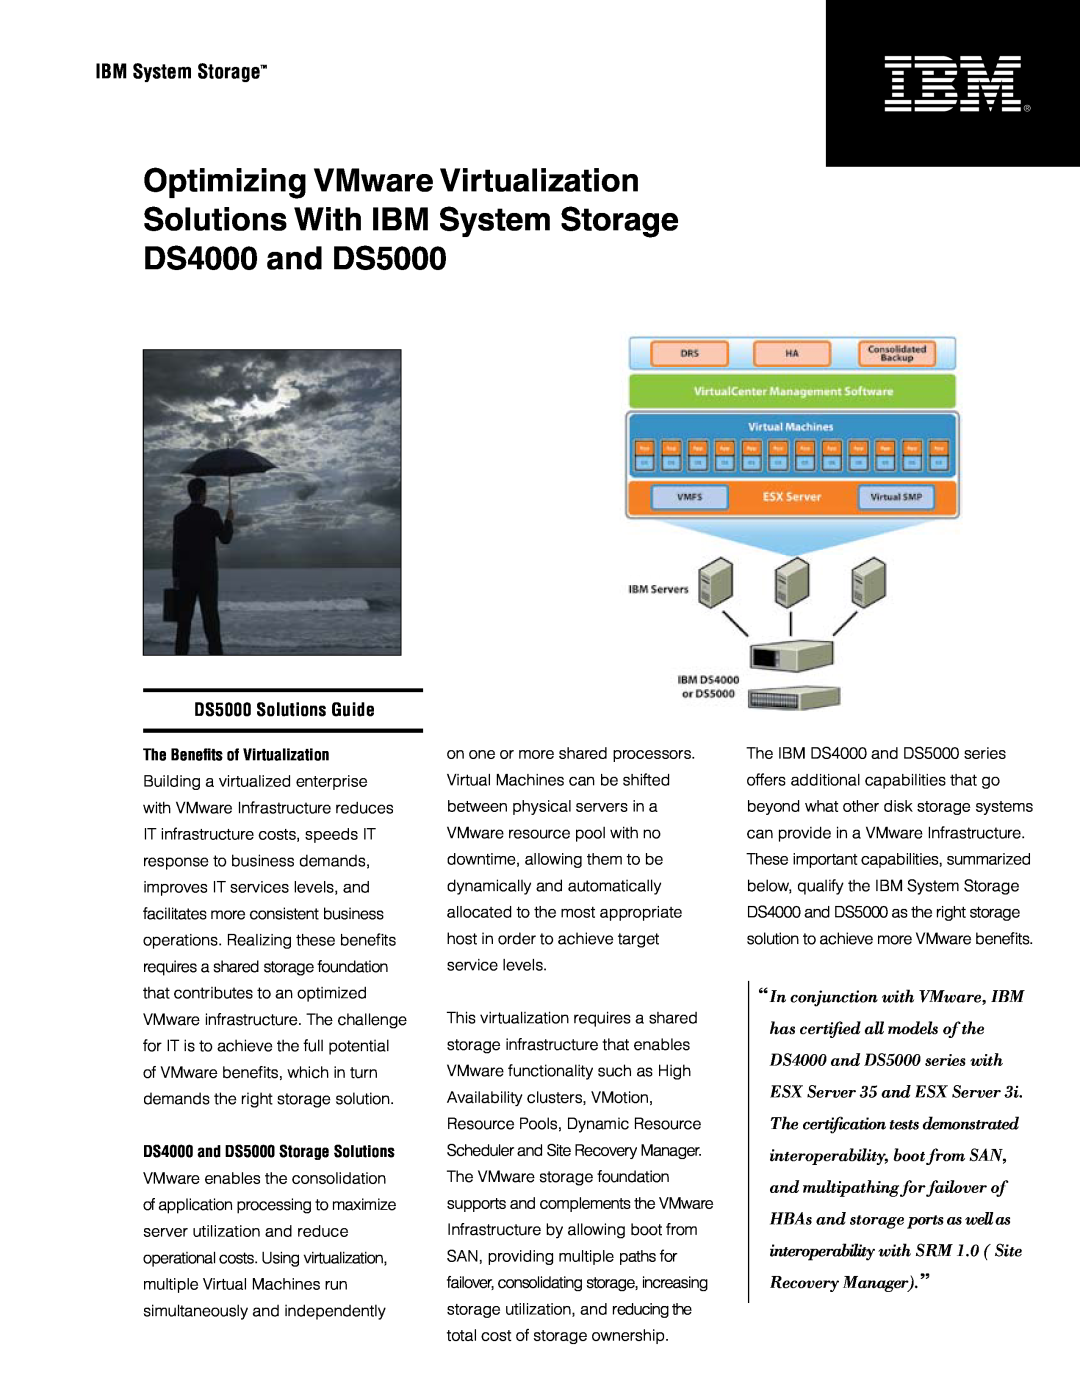 IBM manual The Benefits of Virtualization, DS4000 and DS5000 Storage Solutions, IBM System StorageTM 